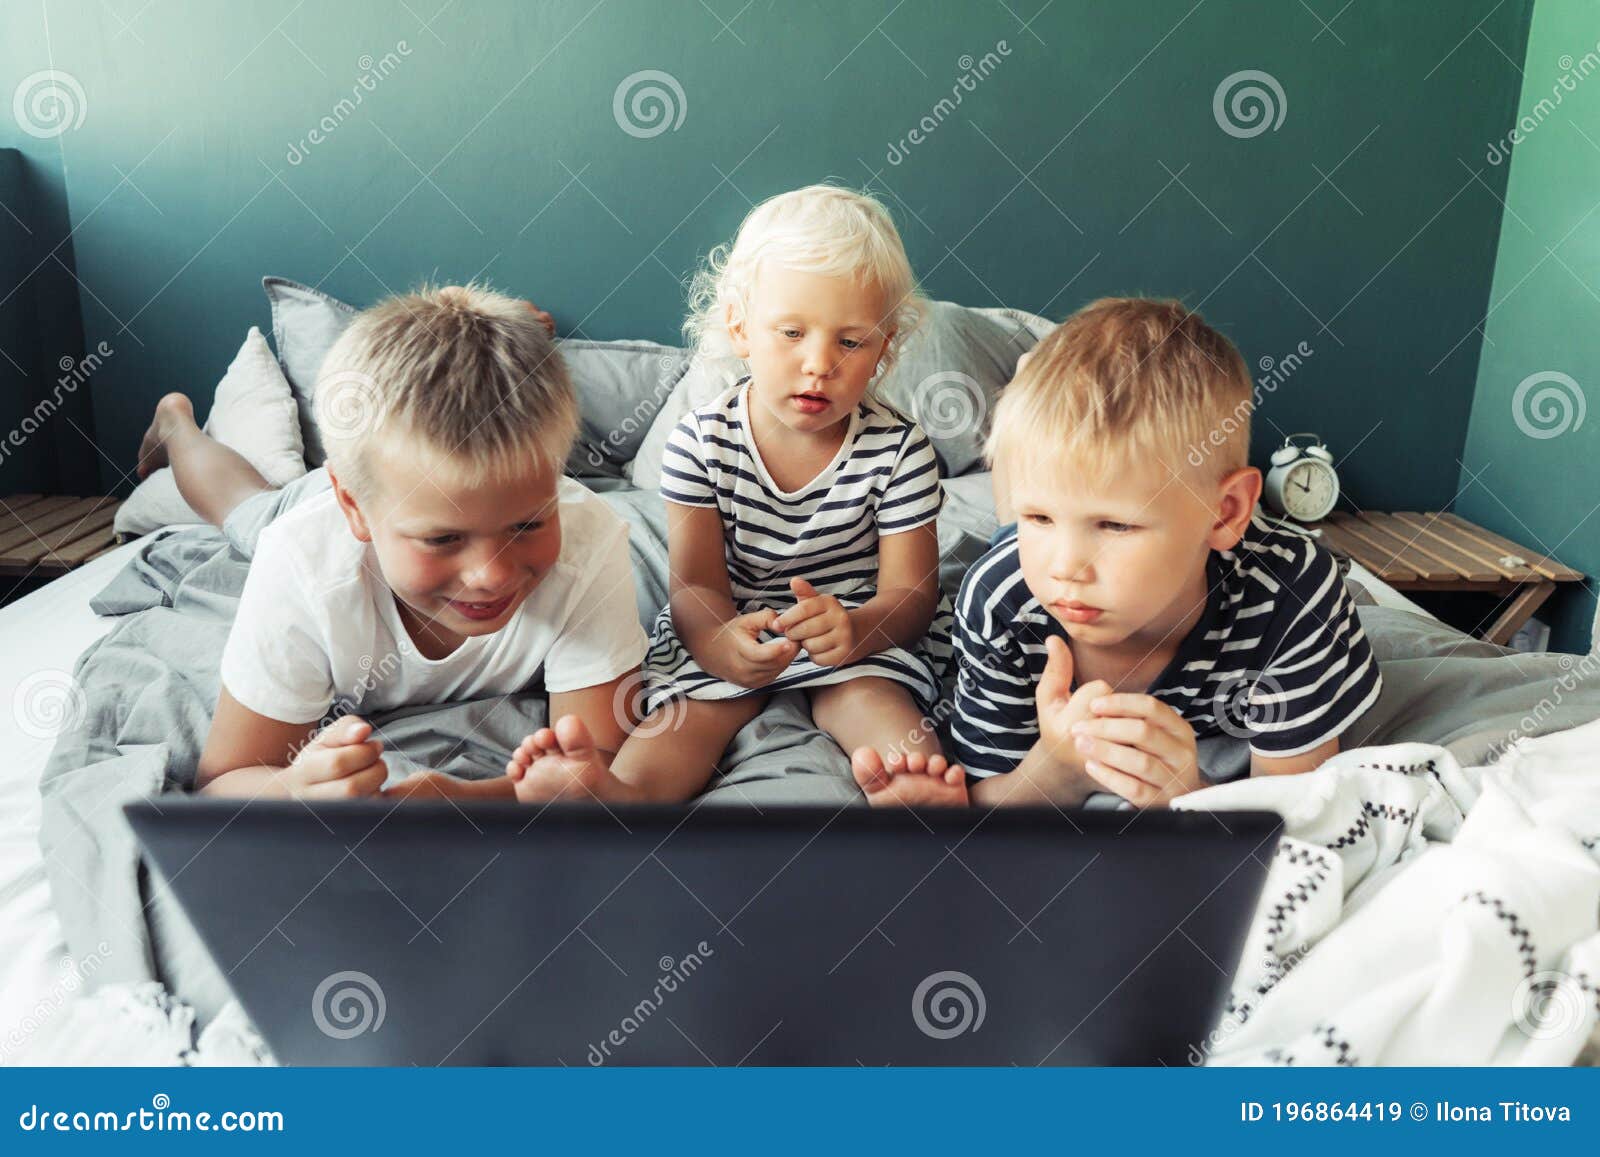 children look at the laptop screen